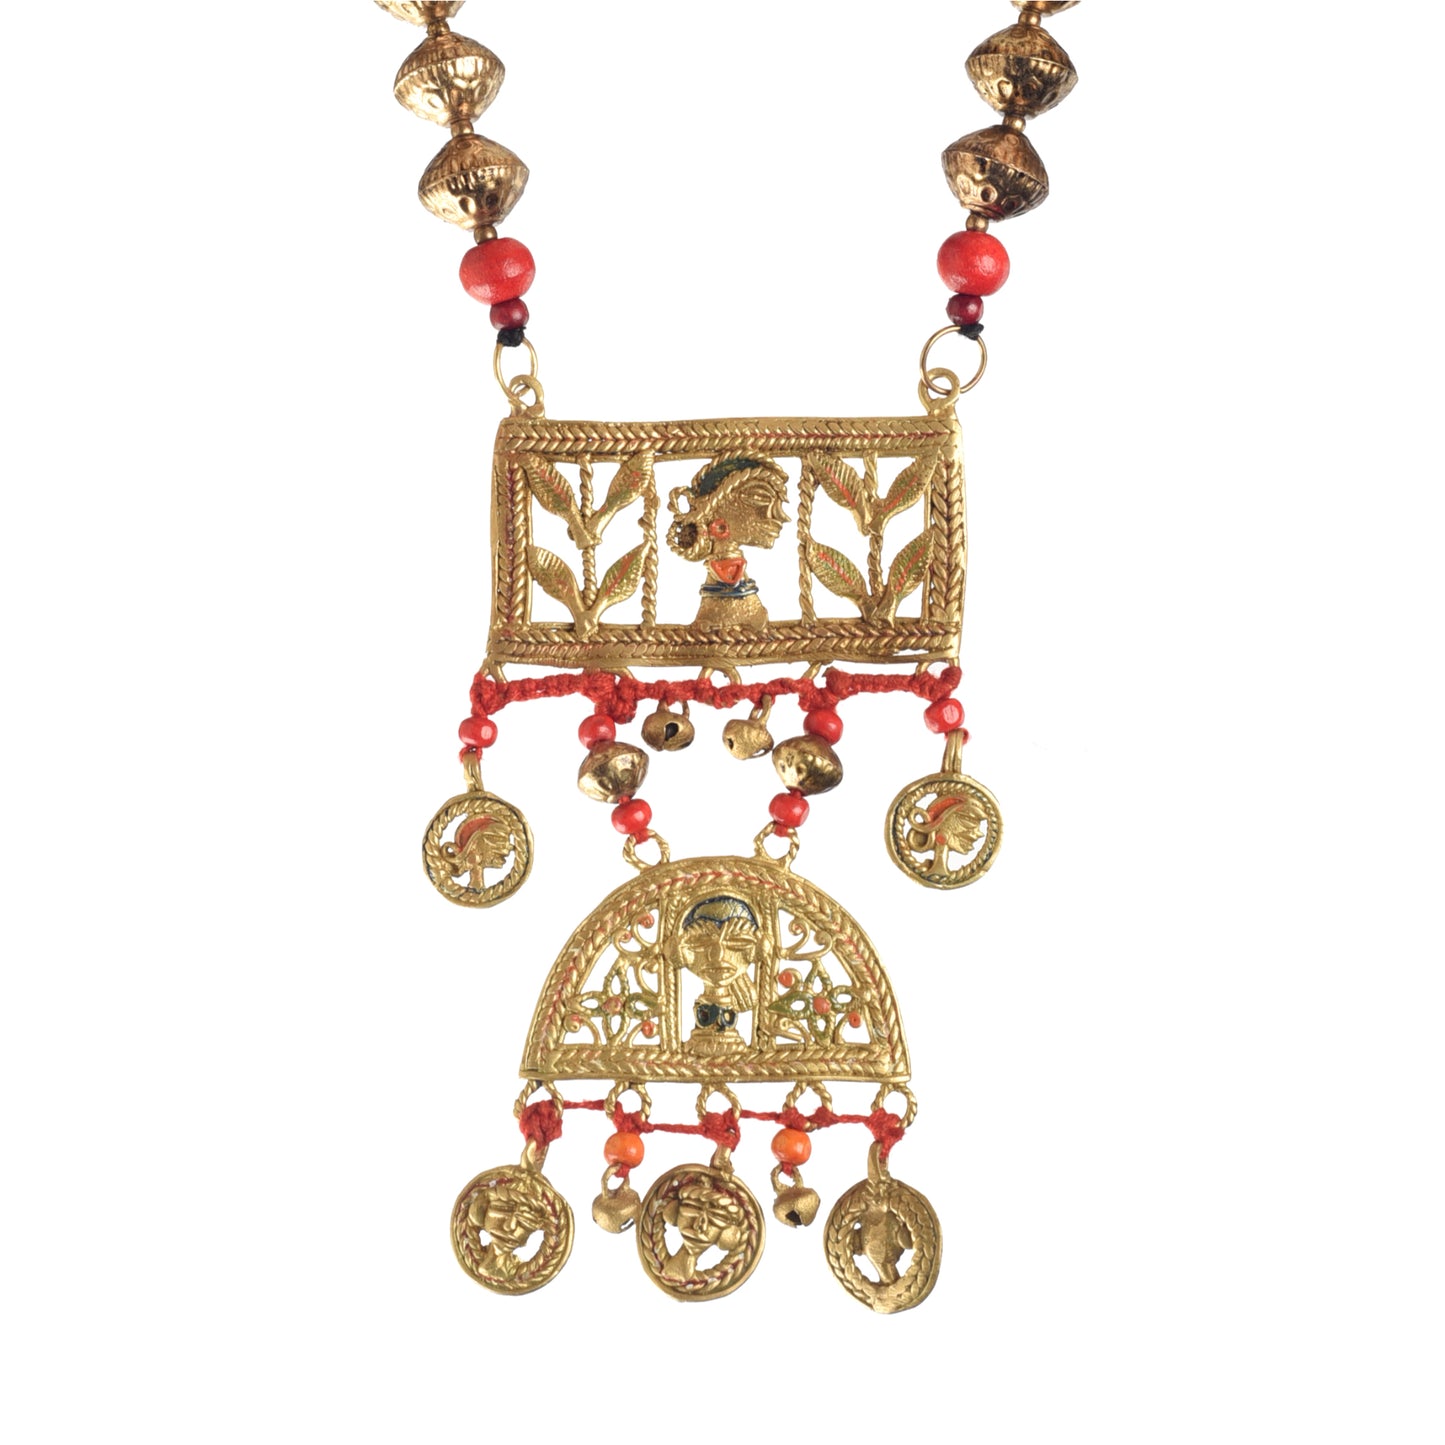 The Empress' Kingdom Handcrafted Necklace (Red)